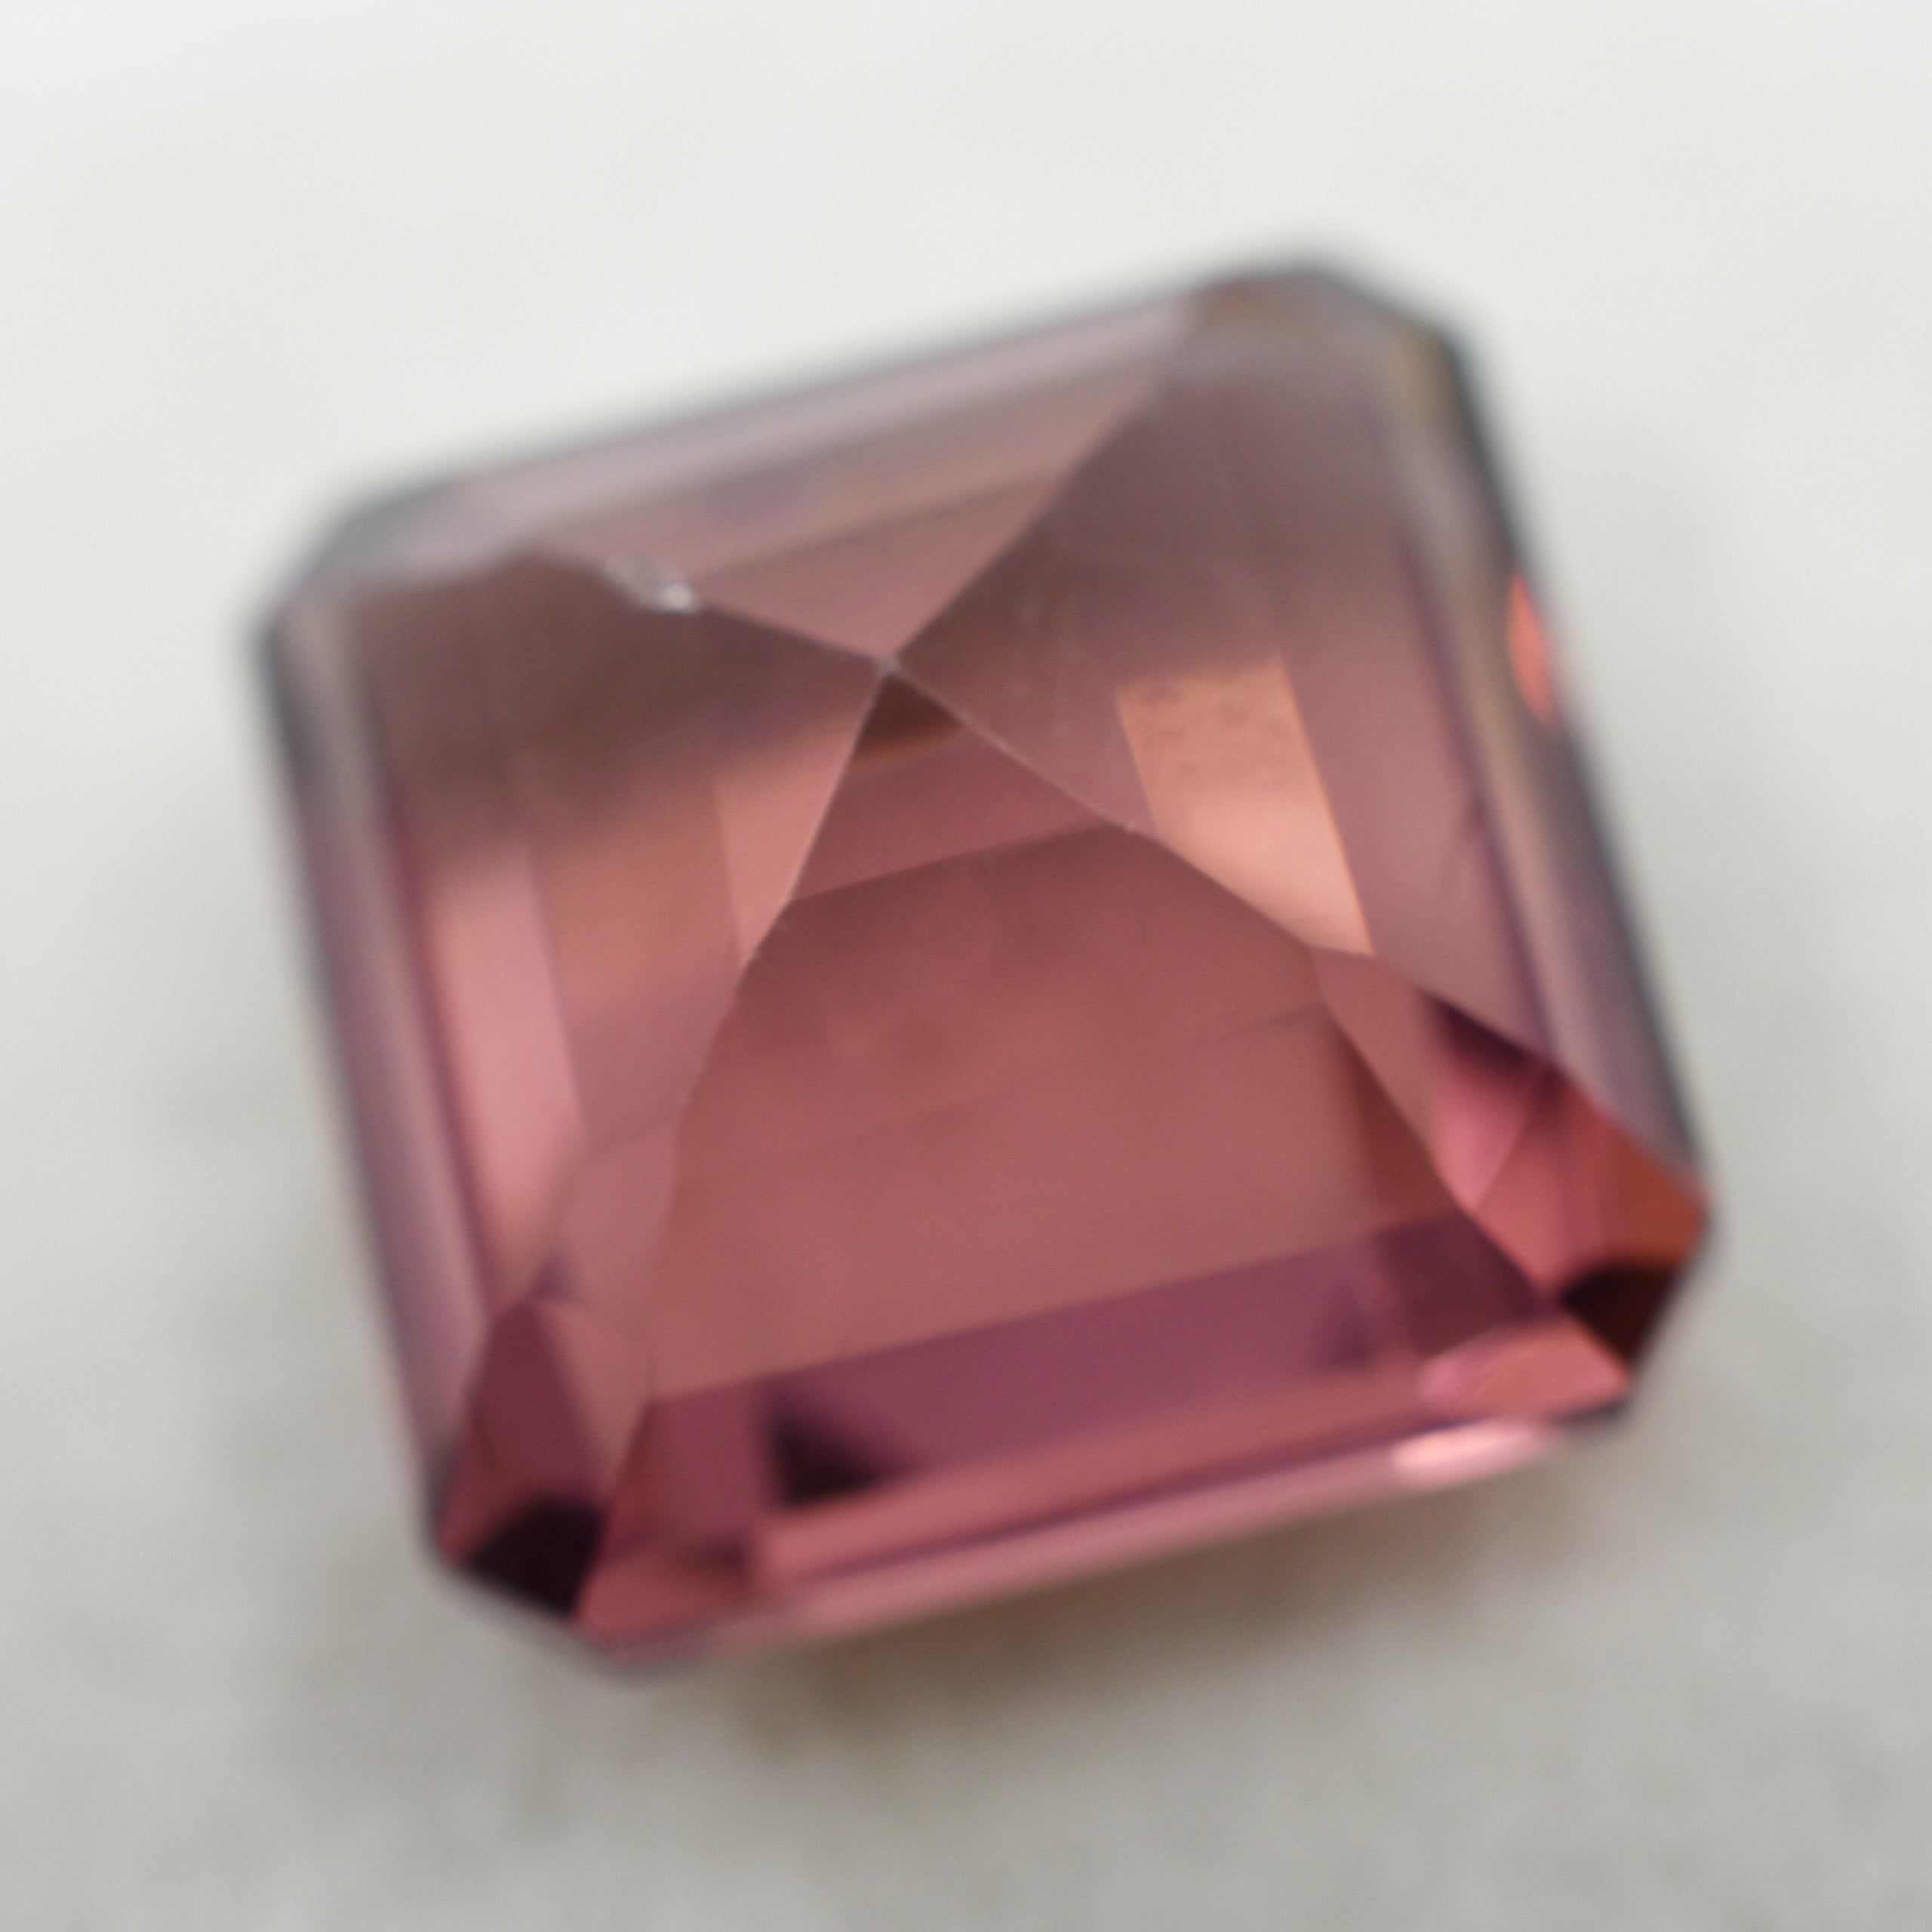 "For Beautiful Jewelry " Padparadscha Sapphire 7.45 Carat Square Cut NATURAL Certified Loose Gemstone , Gift For Birthday